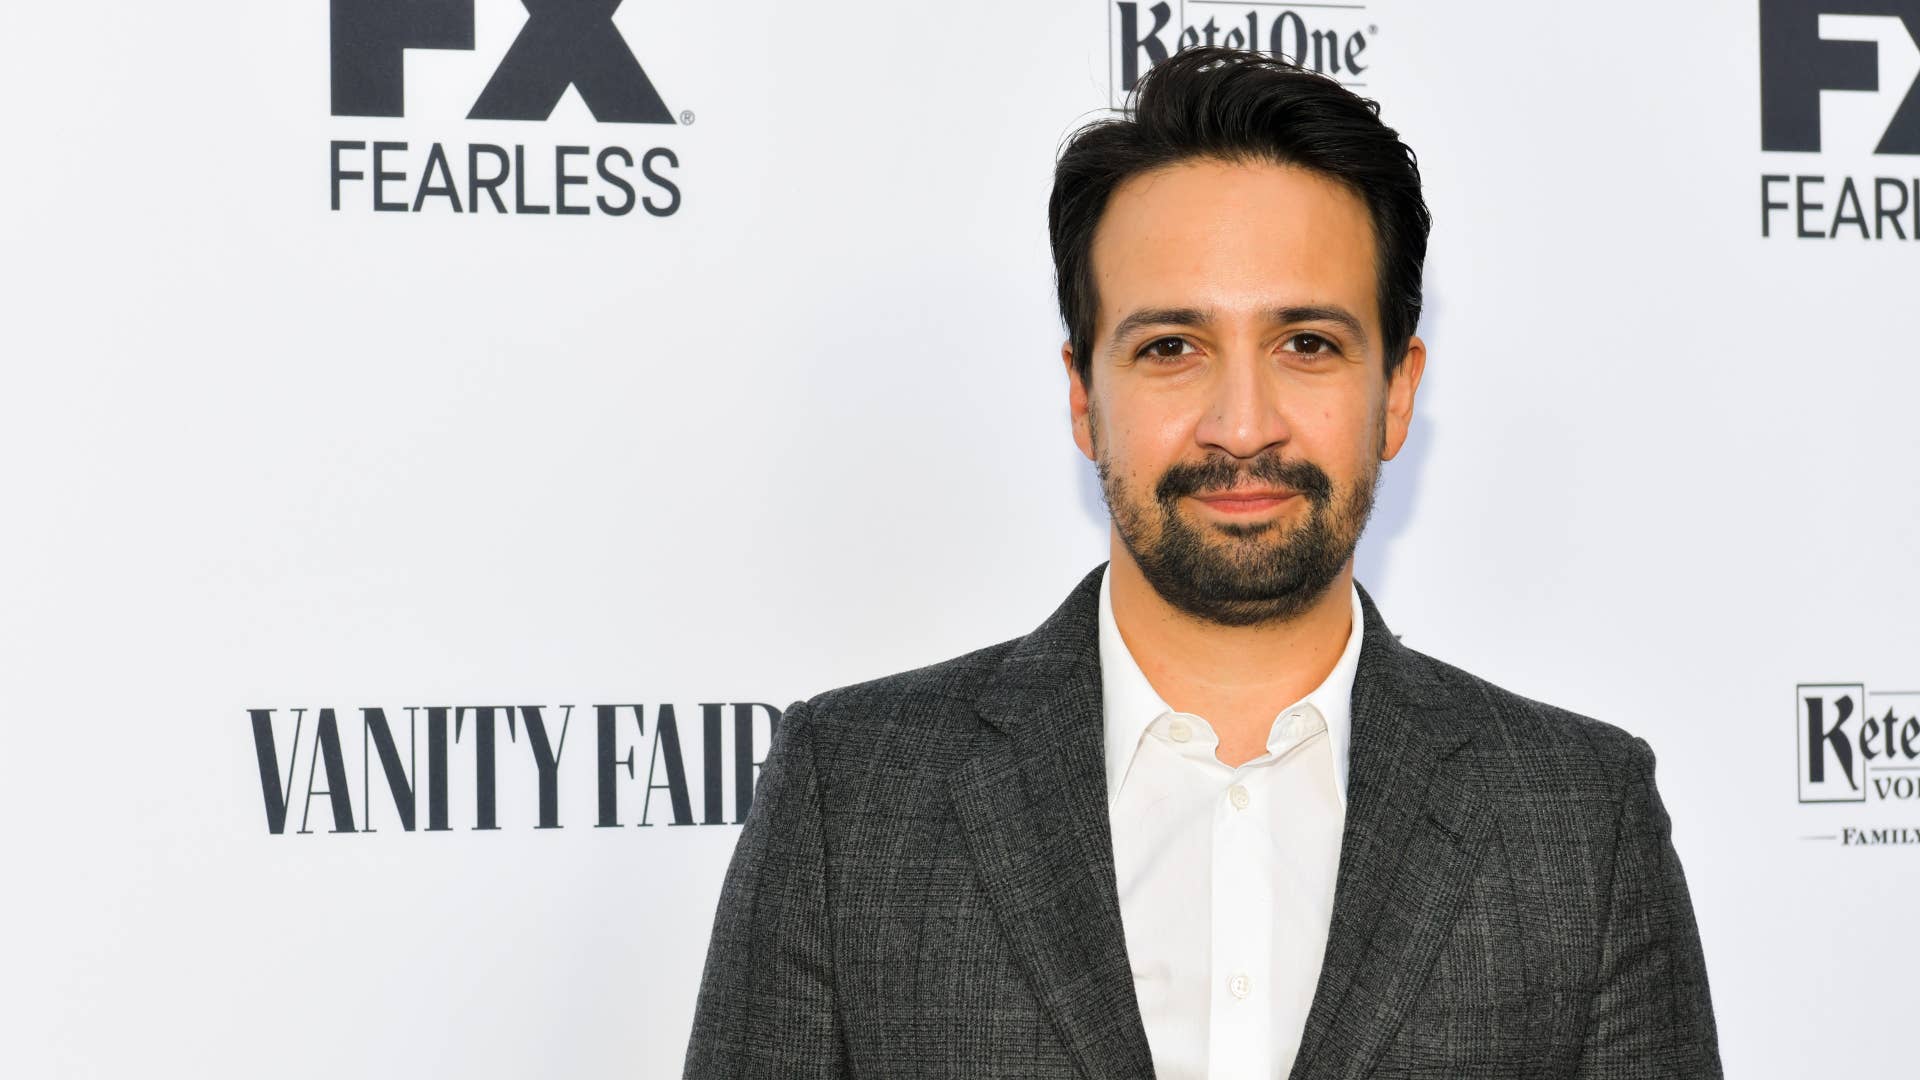 Lin-Manuel Miranda attends Vanity Fair and FX's Annual Primetime Emmy Nominations Party.